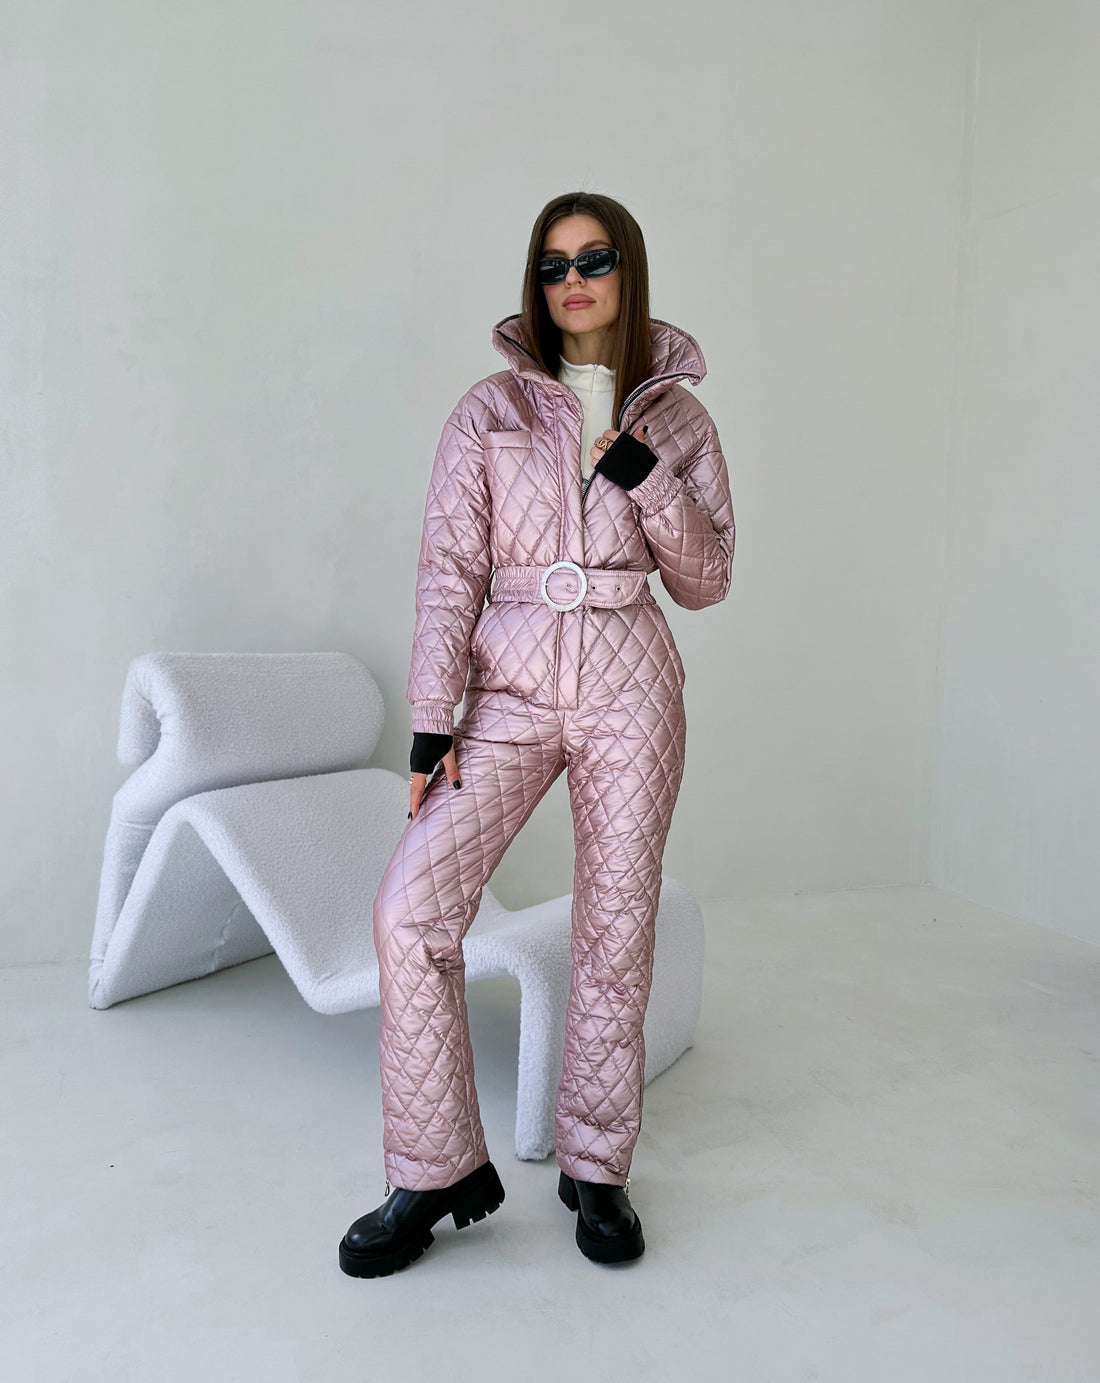 Ski outfit pants one piece suit for women LUCANIA - DUSTY PINK Ladies ski clothing warm for winter sport